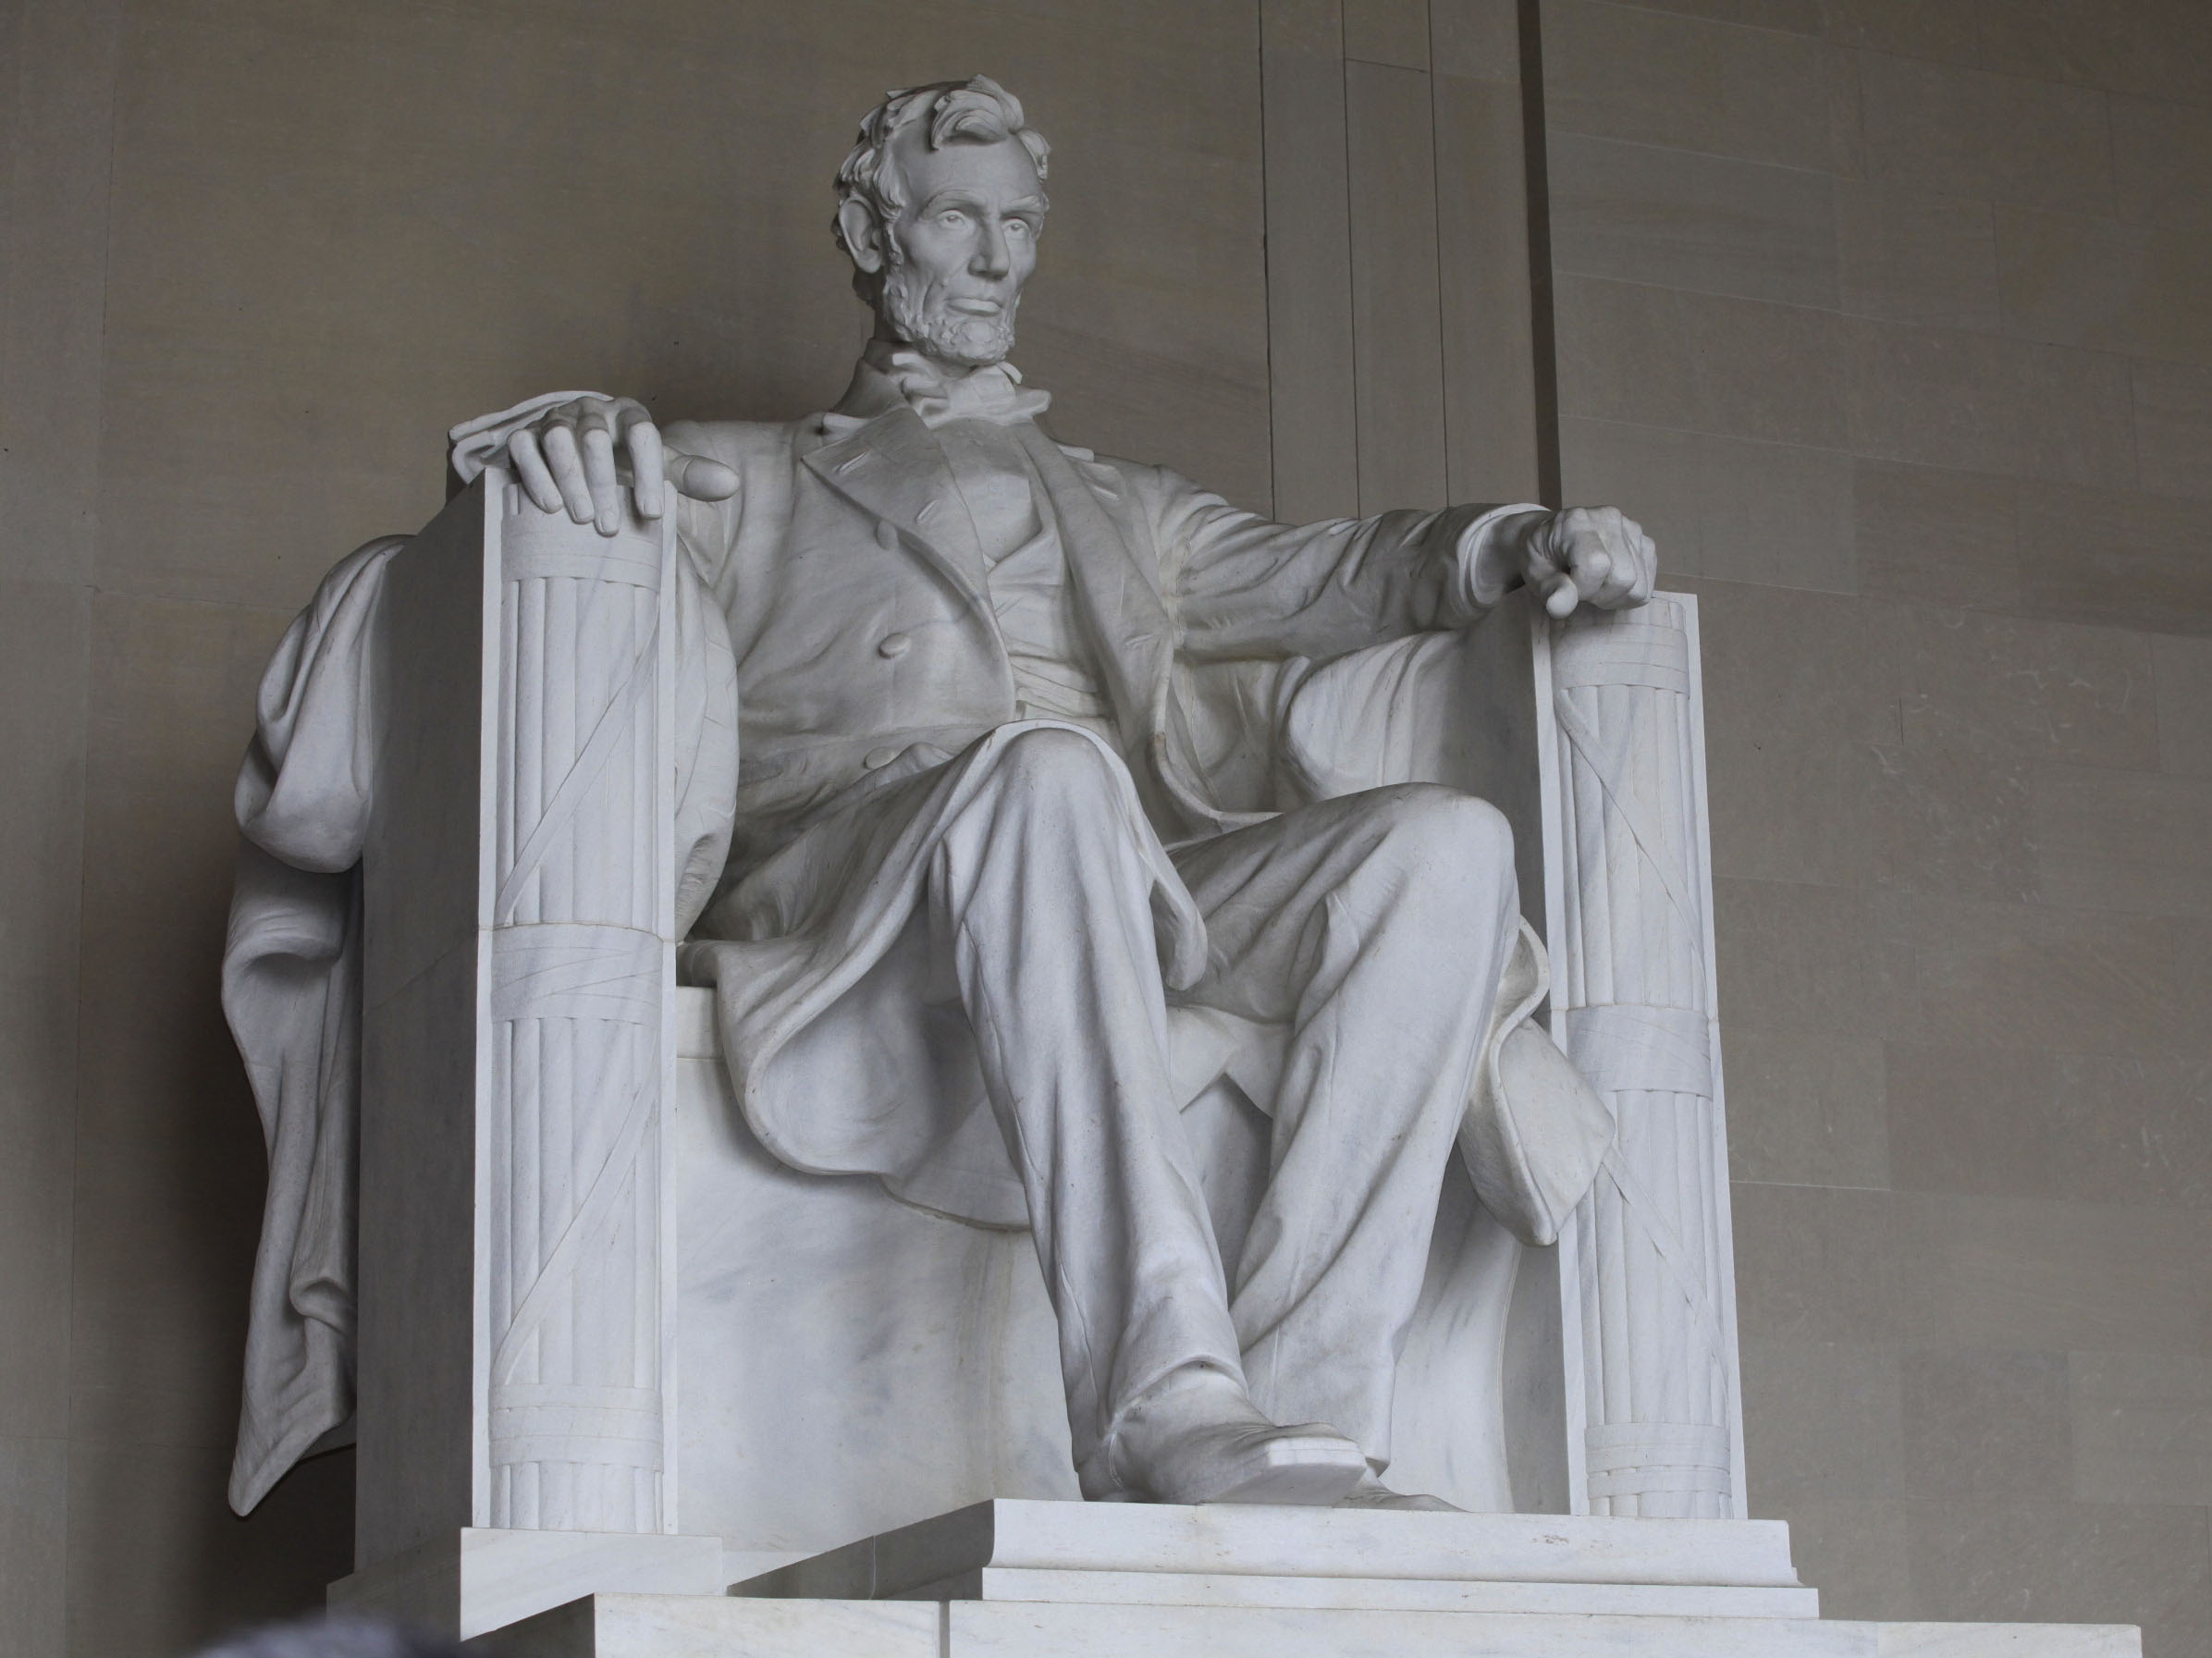 Lincoln Memorial (National Park Service)